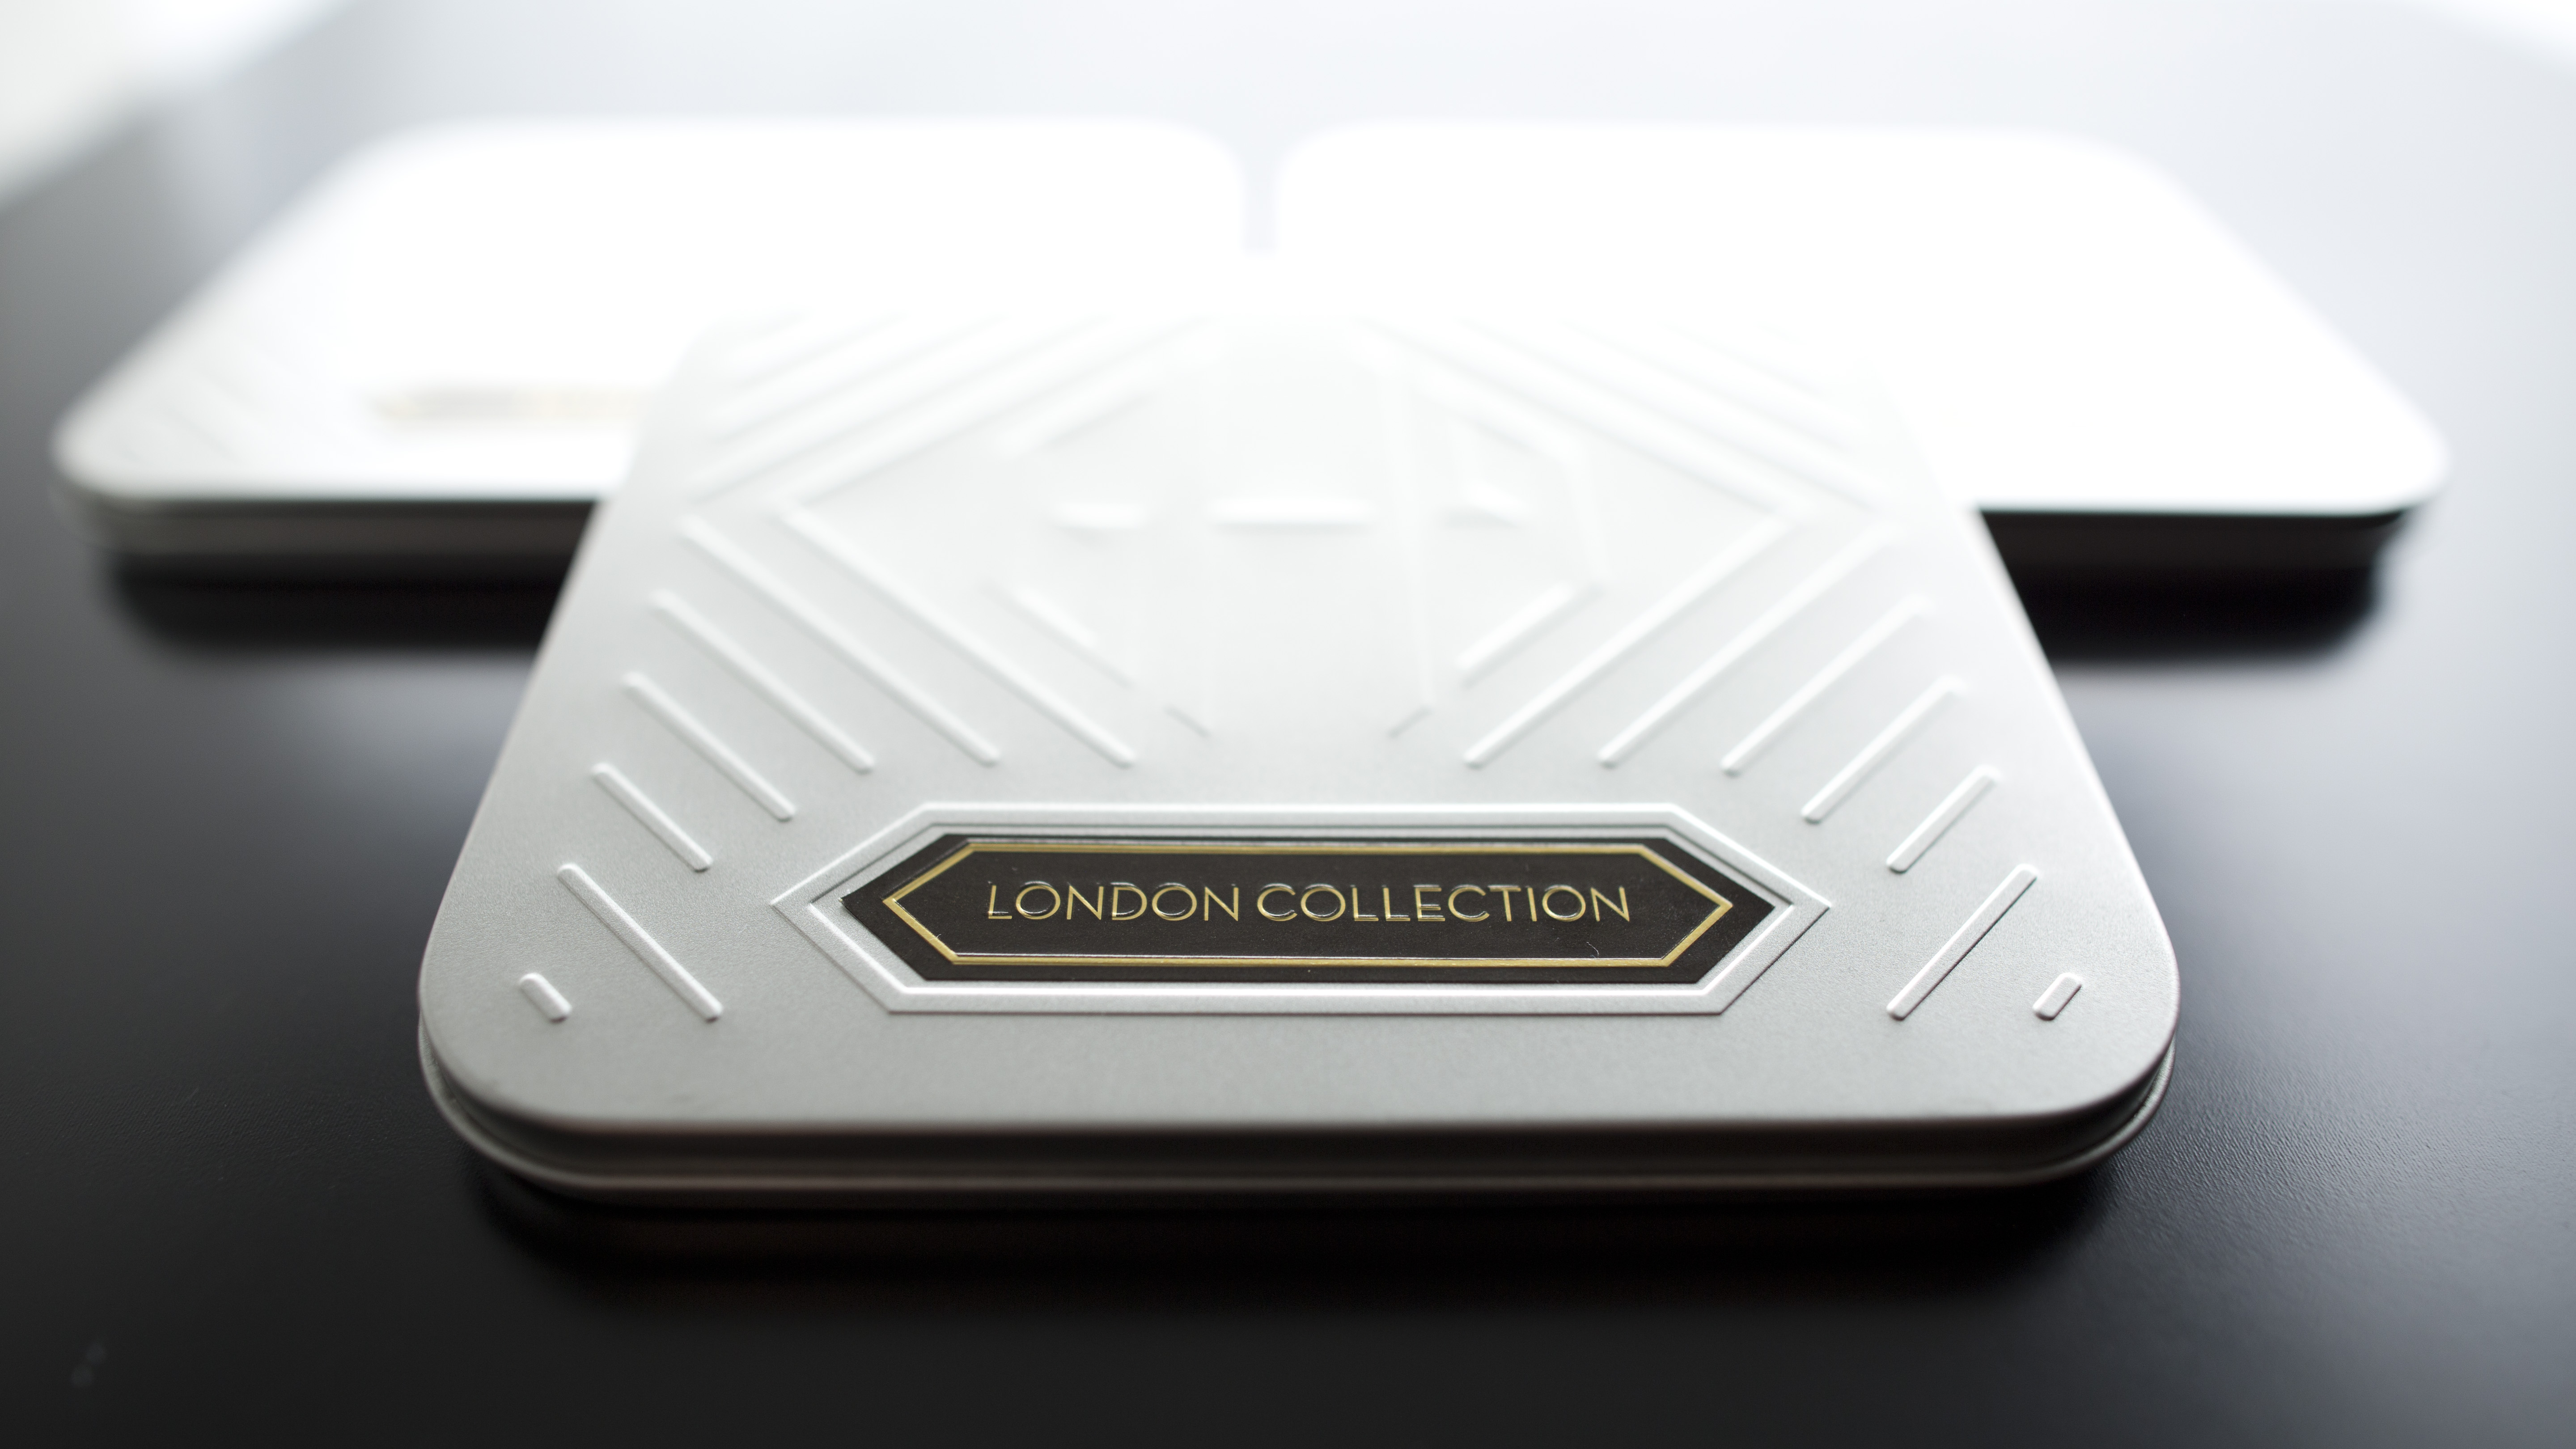 London Collection by Guy Hollingworth